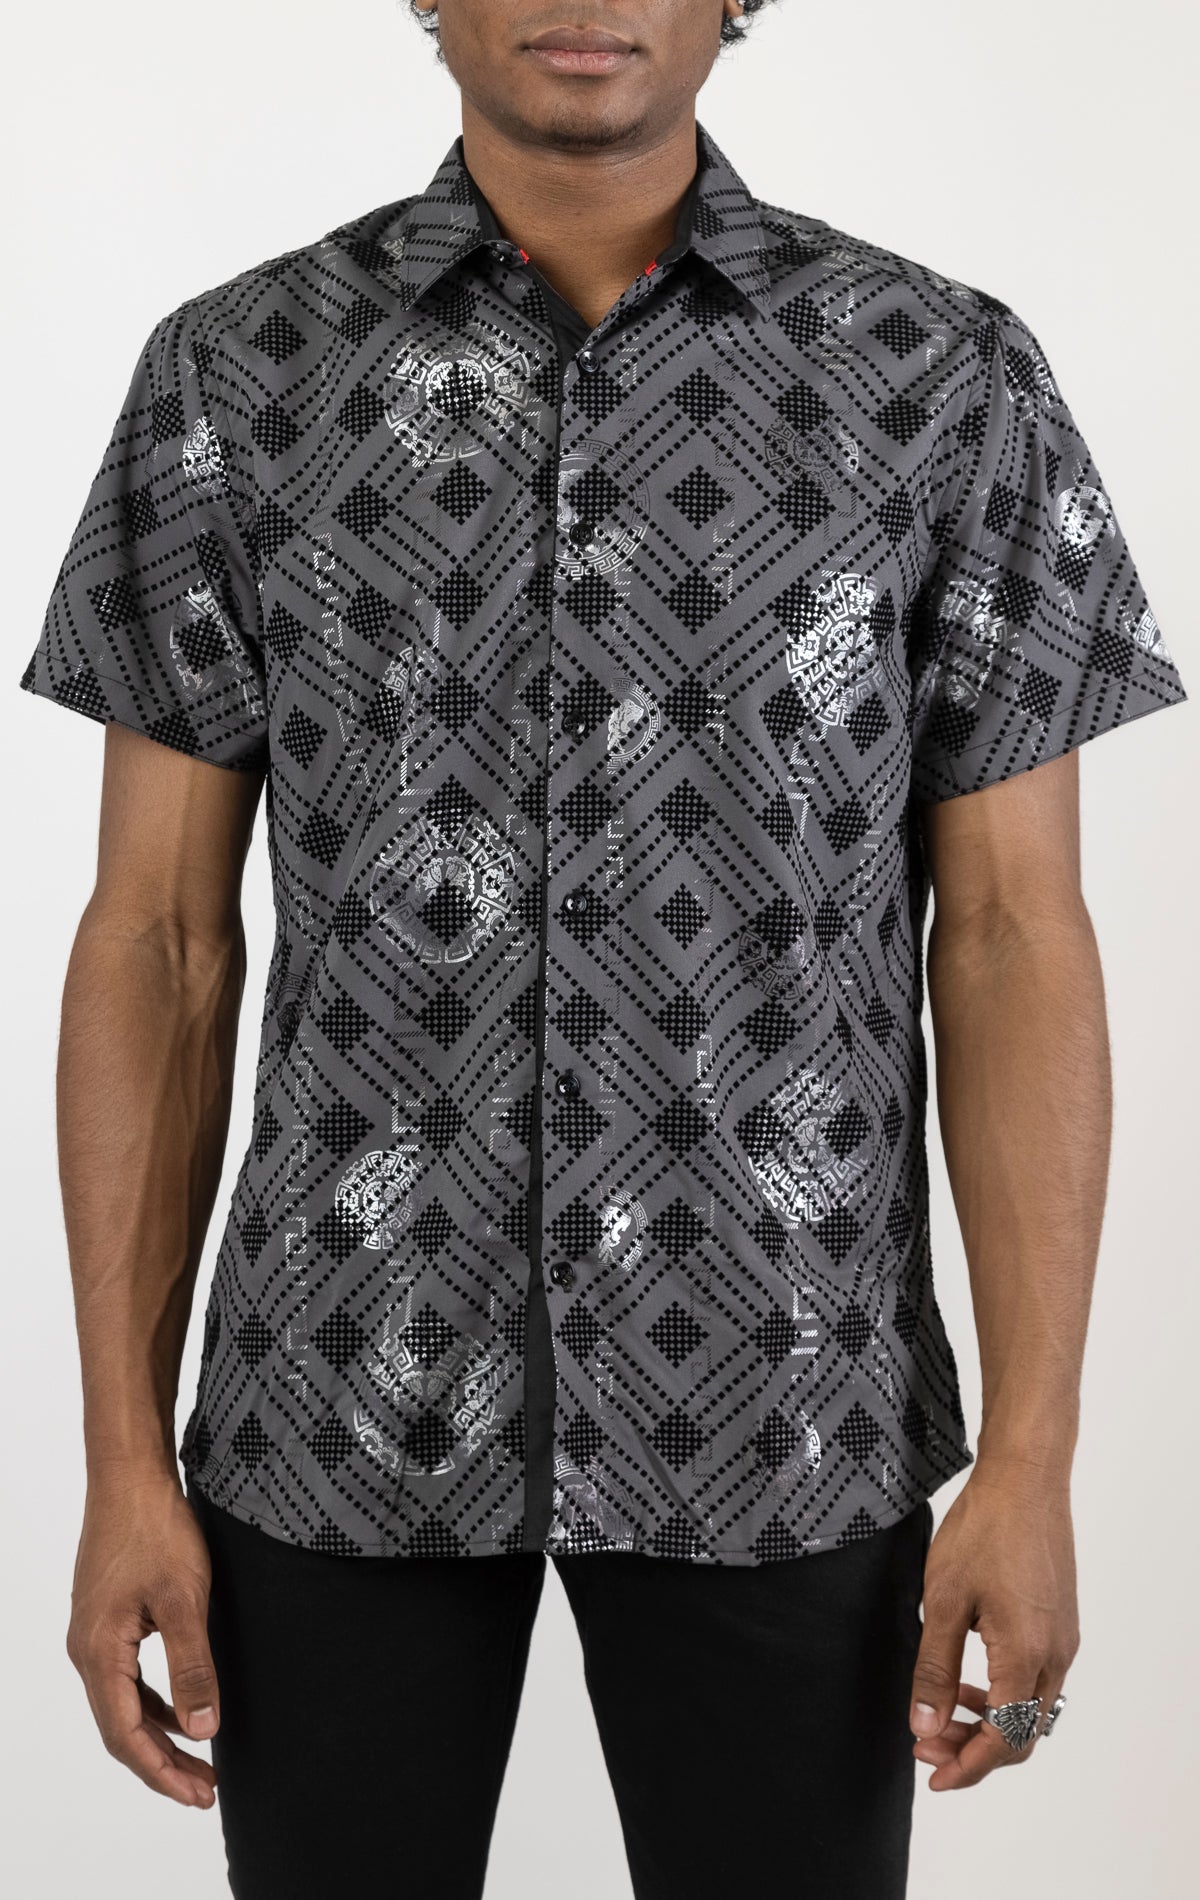 Men's modal blend button-down shirt in black. The shirt is made from a 95% modal and 5% spandex blend and features a modern cut, fade-resistant color, and a classic button-down collar.